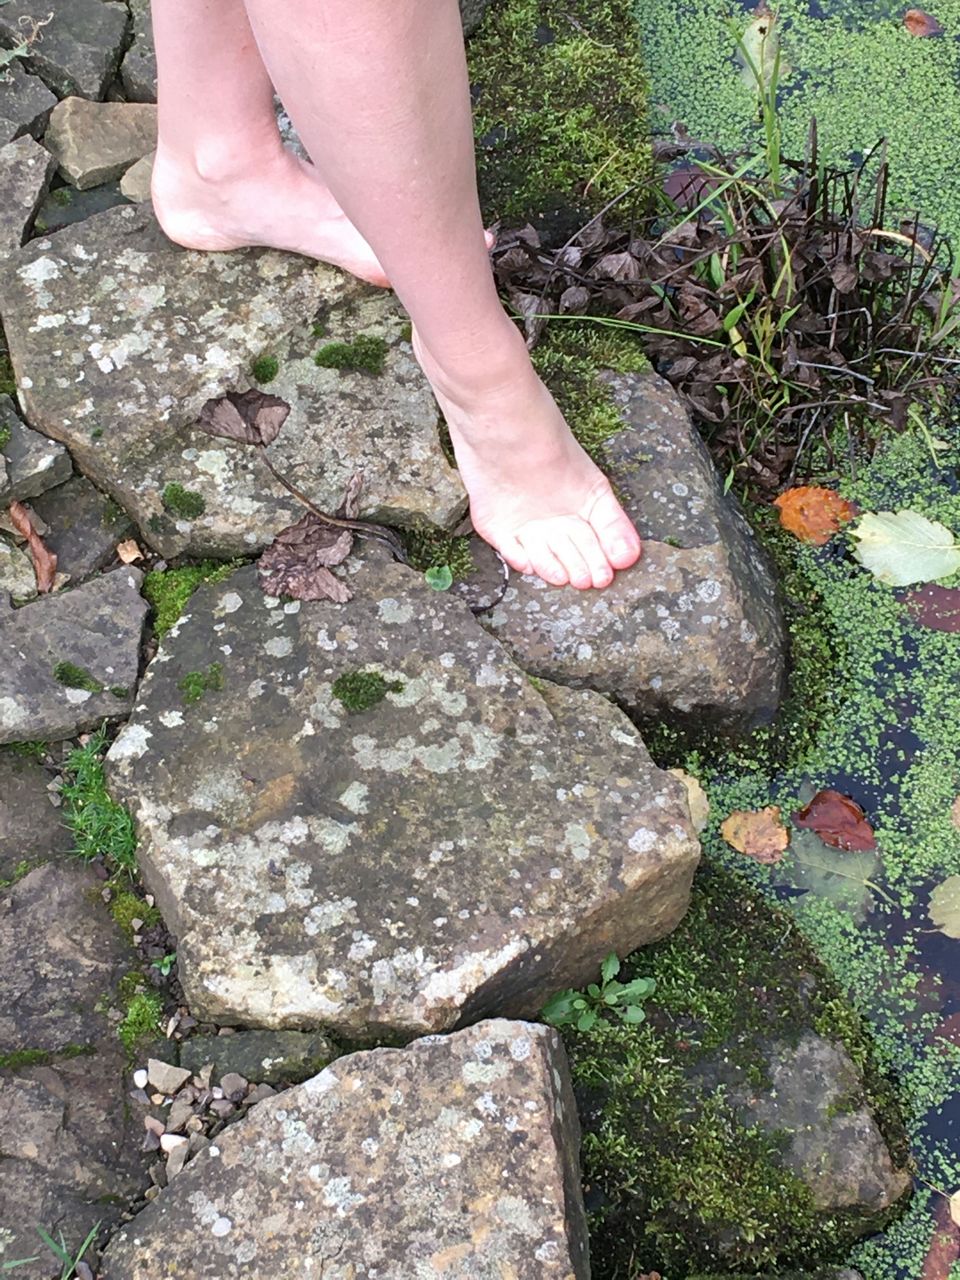 Lespieds Barefoot Outside In The Uk